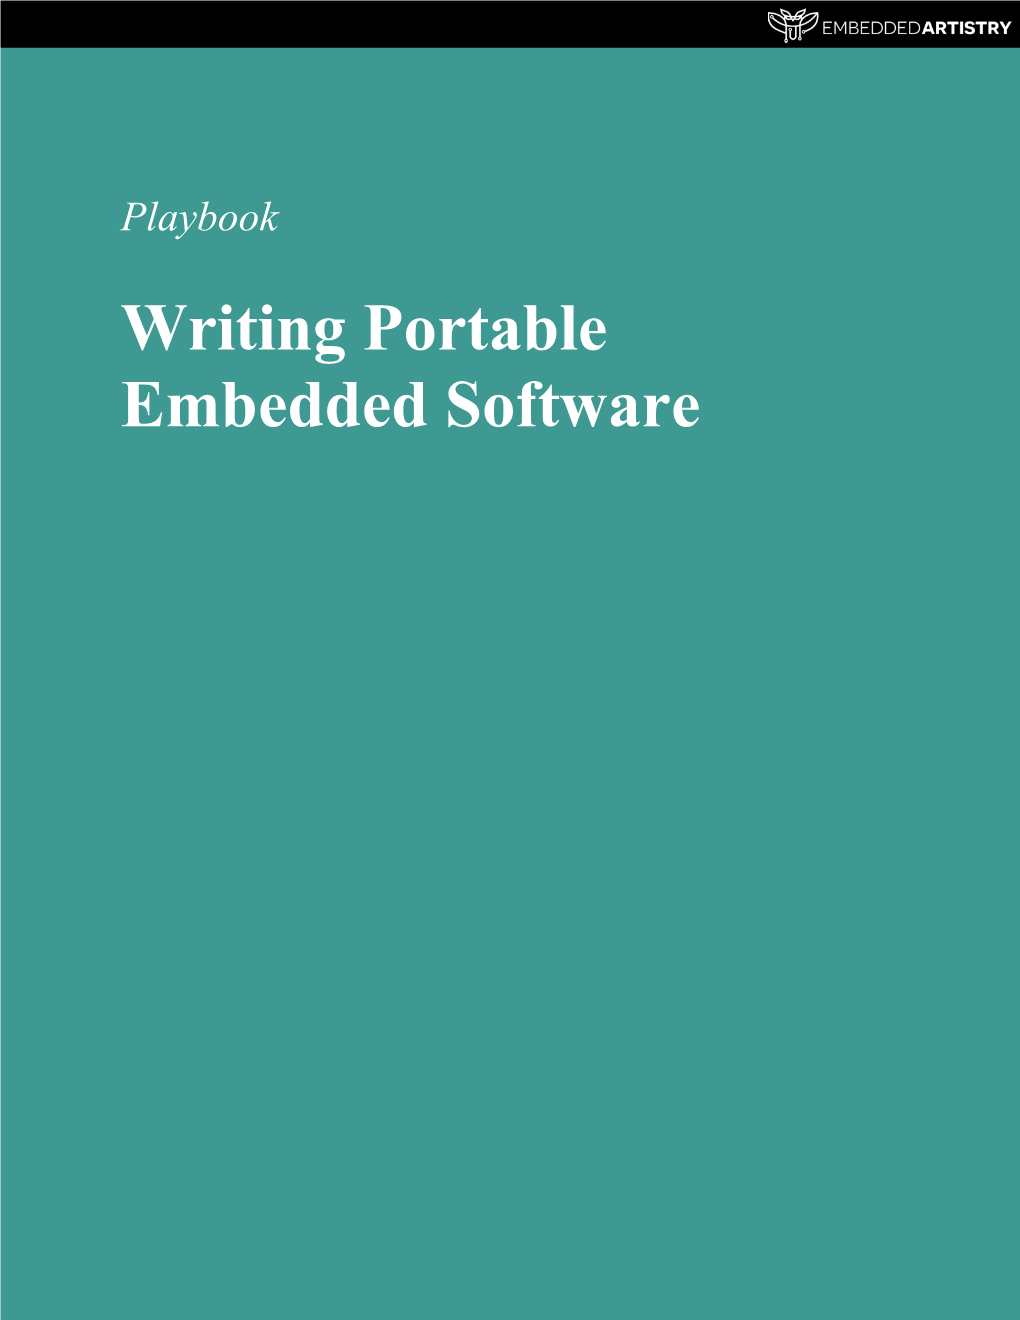 Writing Portable Embedded Software